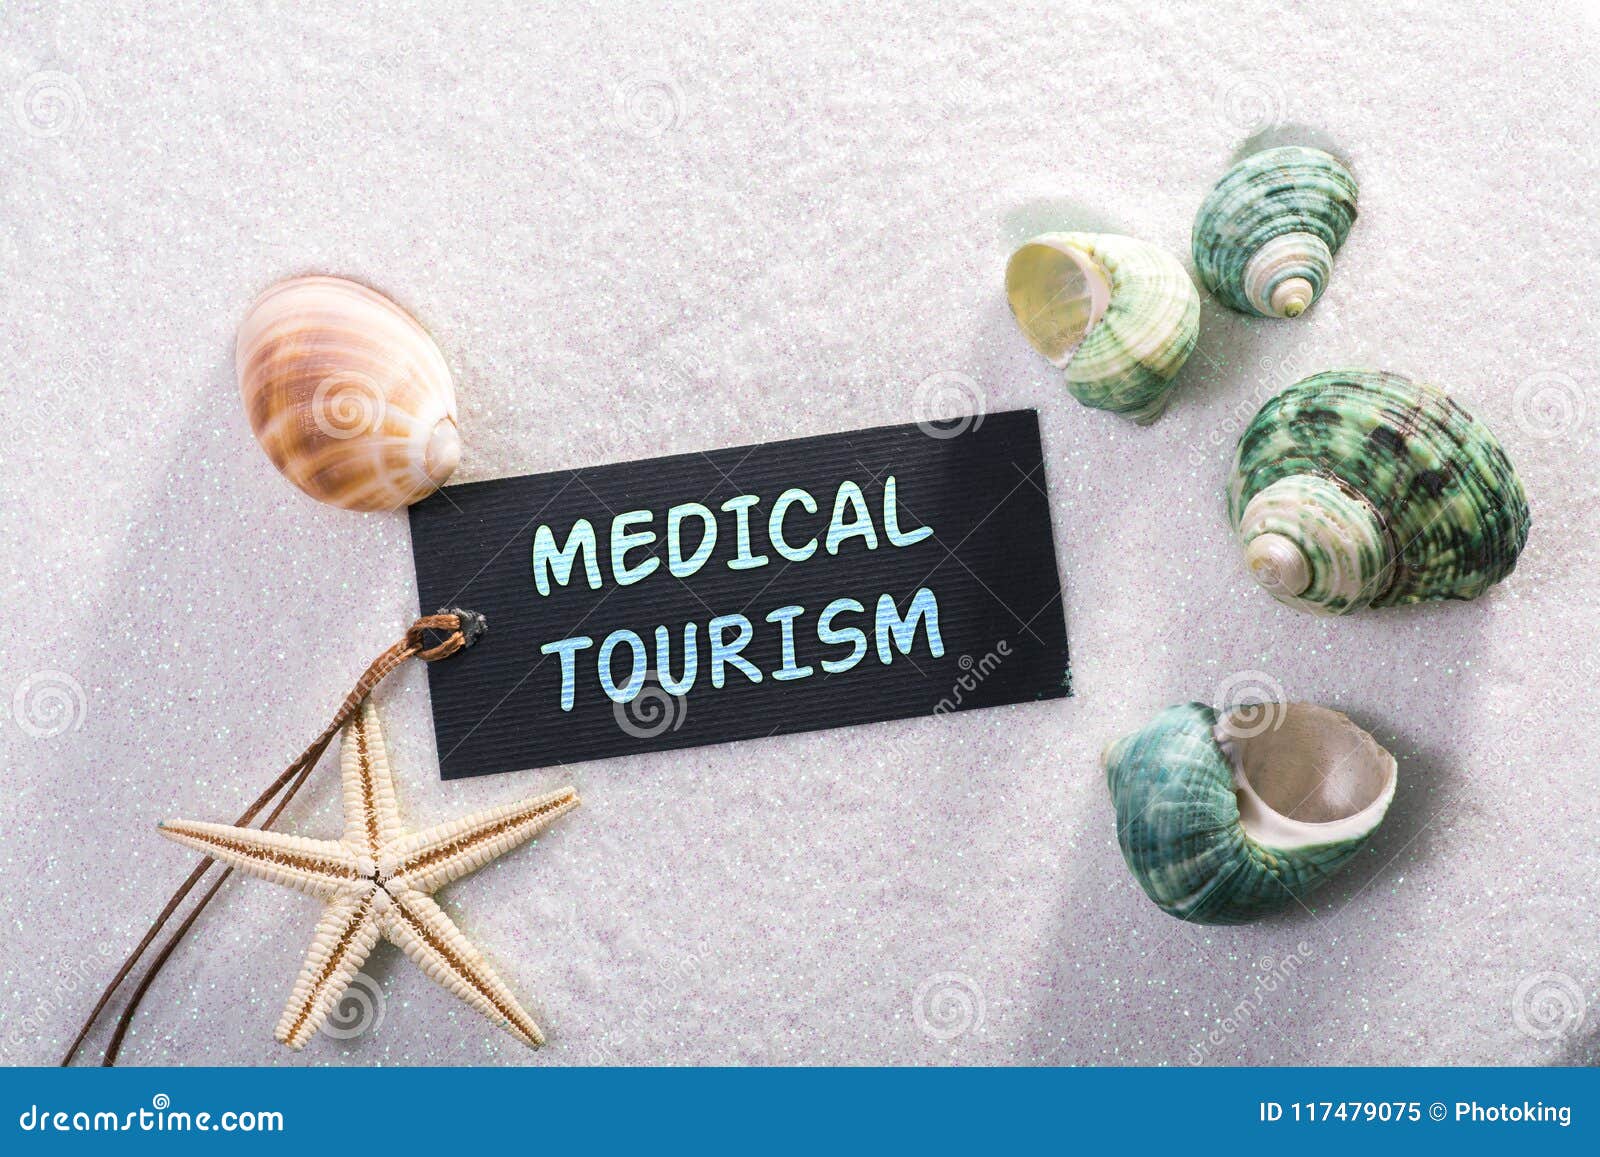 label with medical tourism